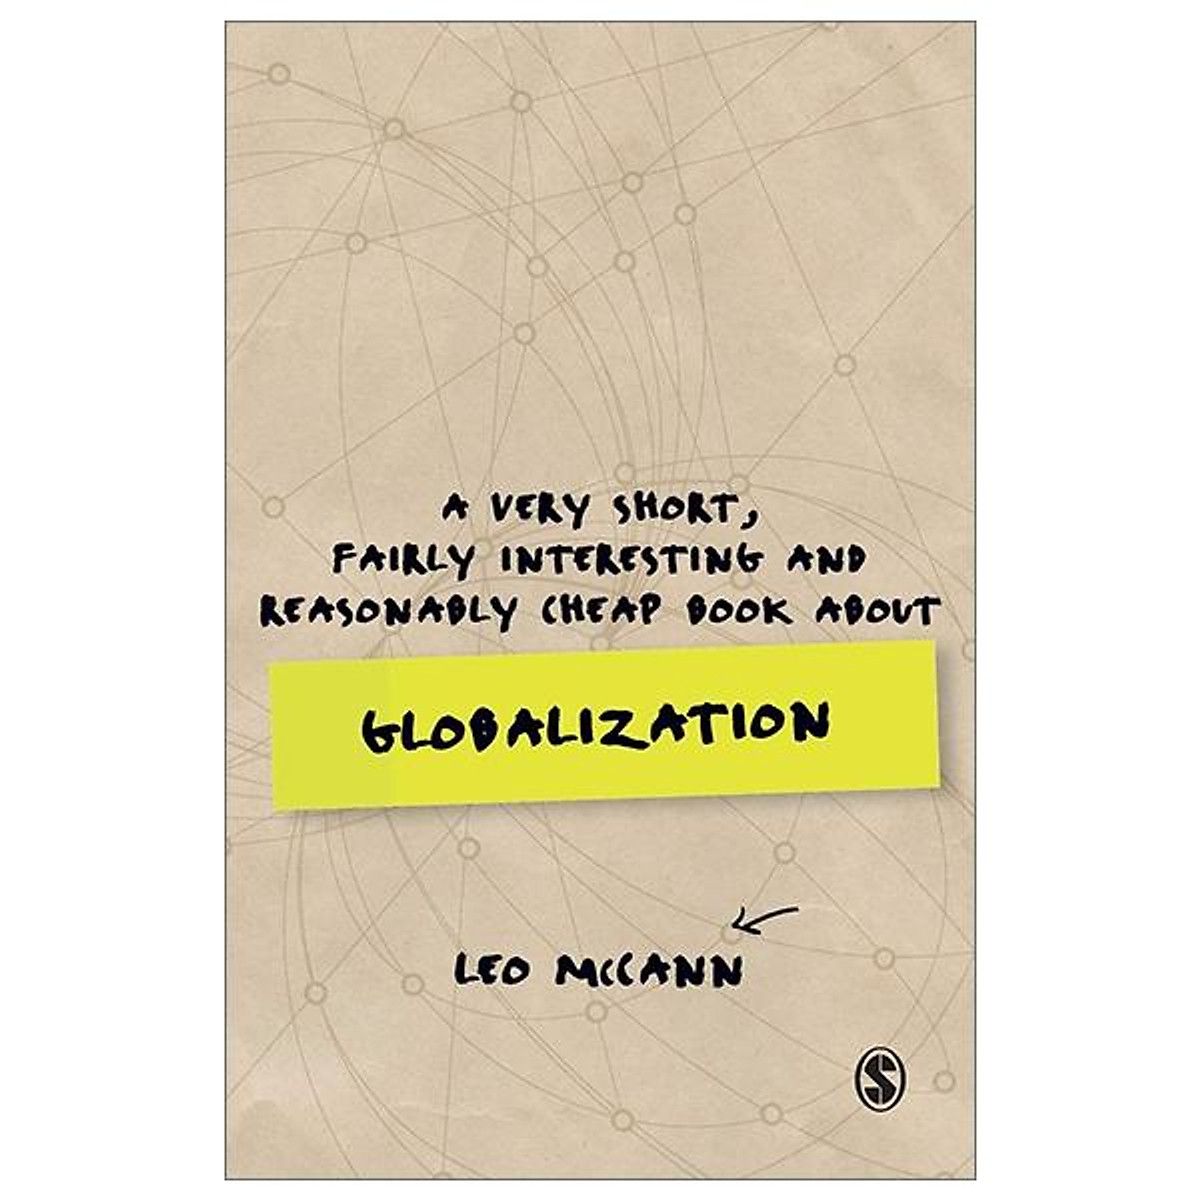 A Very Short, Fairly Interesting and Reasonably Cheap Book About Globalization (Very Short, Fairly Interesting & Cheap Books)